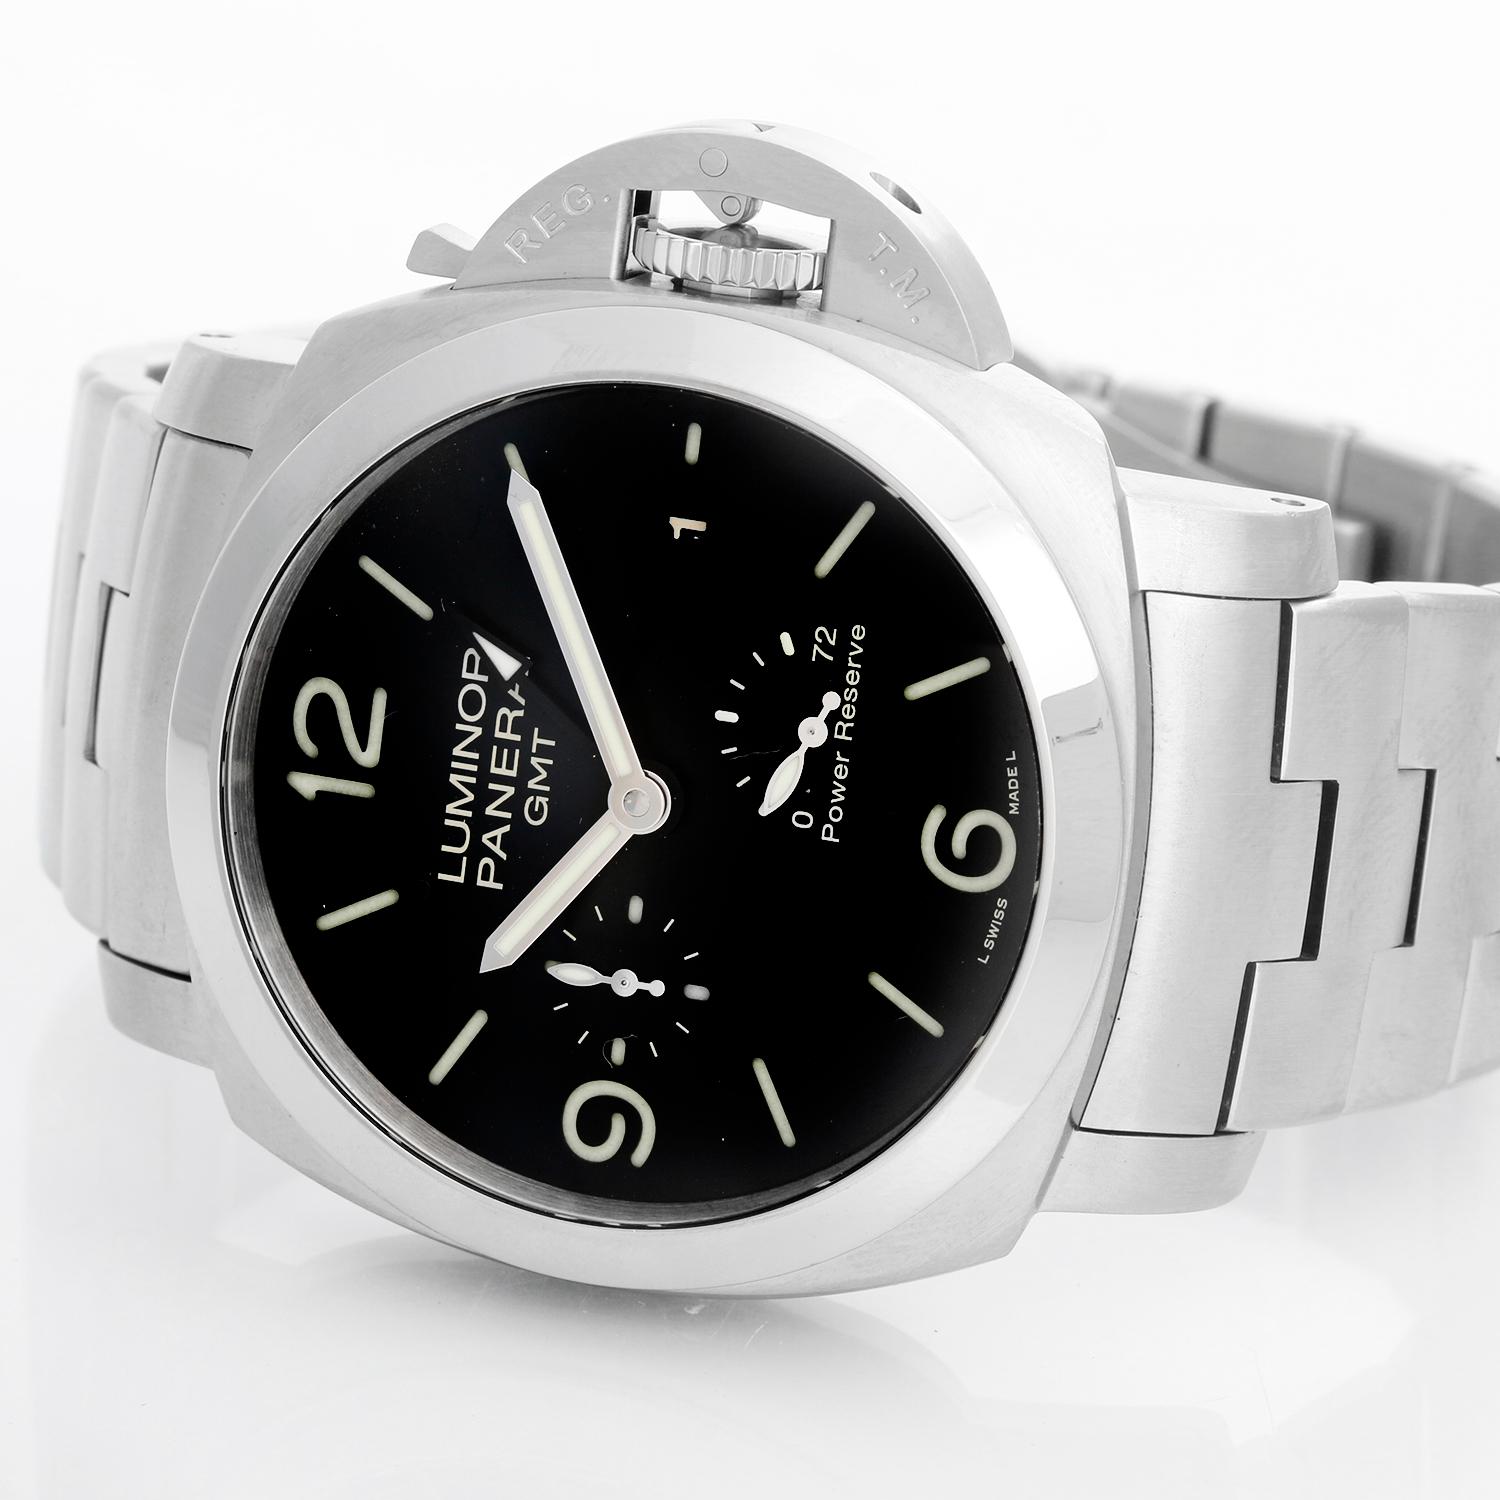 Panerai Luminor Acciaio 1950 3-Day GMT PAM 347 - Automatic . Stainless steel ( 44 mm ). Black dial with Index and Arabic numerals;  GMT/ Wold Time, Date, Power Reserve. Stainless steel bracelet with folding buckle ; includes new black rubber strap.